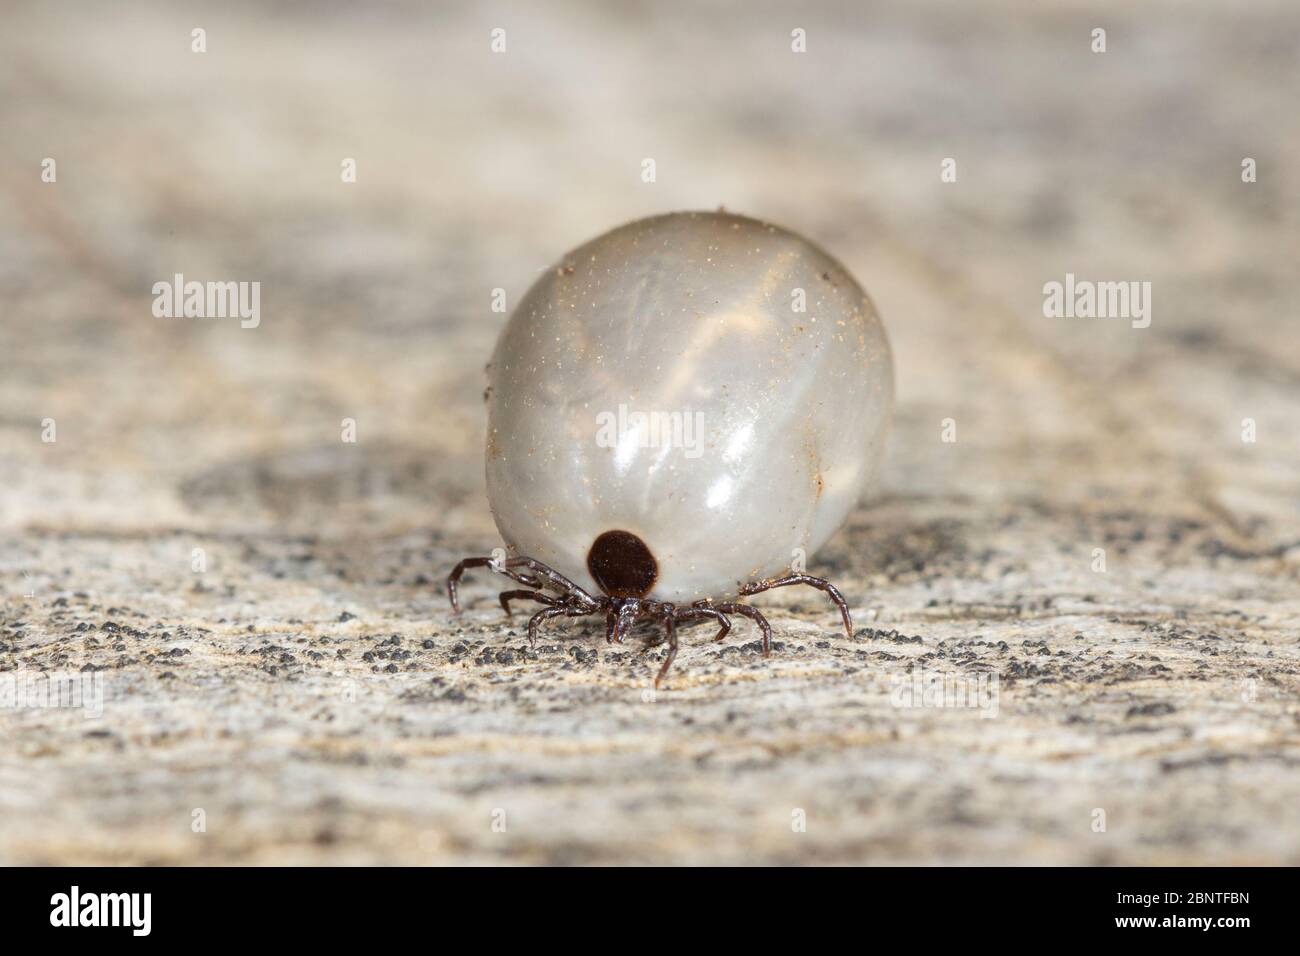 With blood bloated female European castor bean tick or sheep tick (Ixodes ricinus). Stock Photo